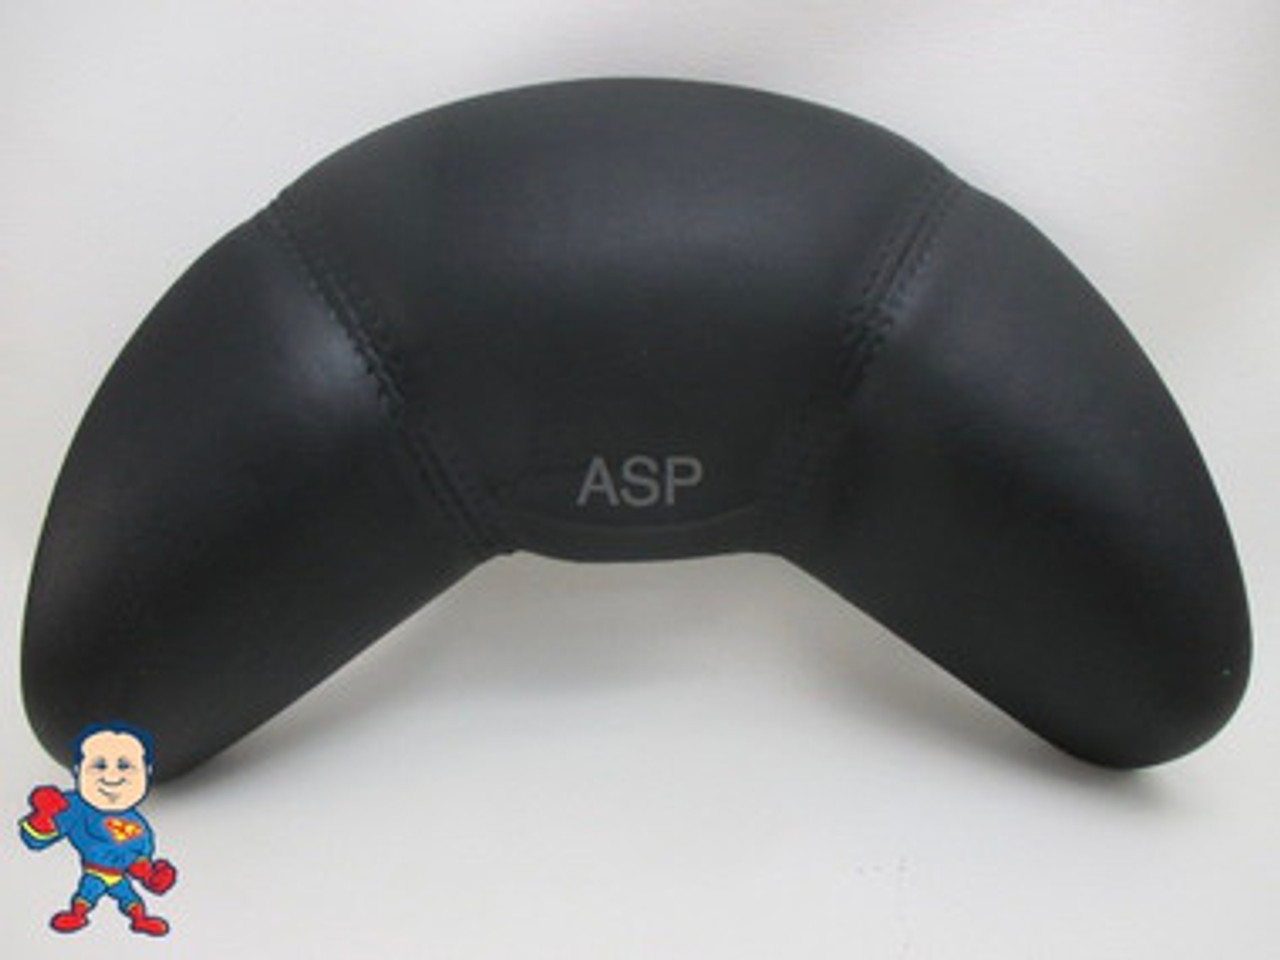 Dynasty Spa Hot Tub Round Neck Pillow Black Head Rest 2009 Stitched Single Pin 1870